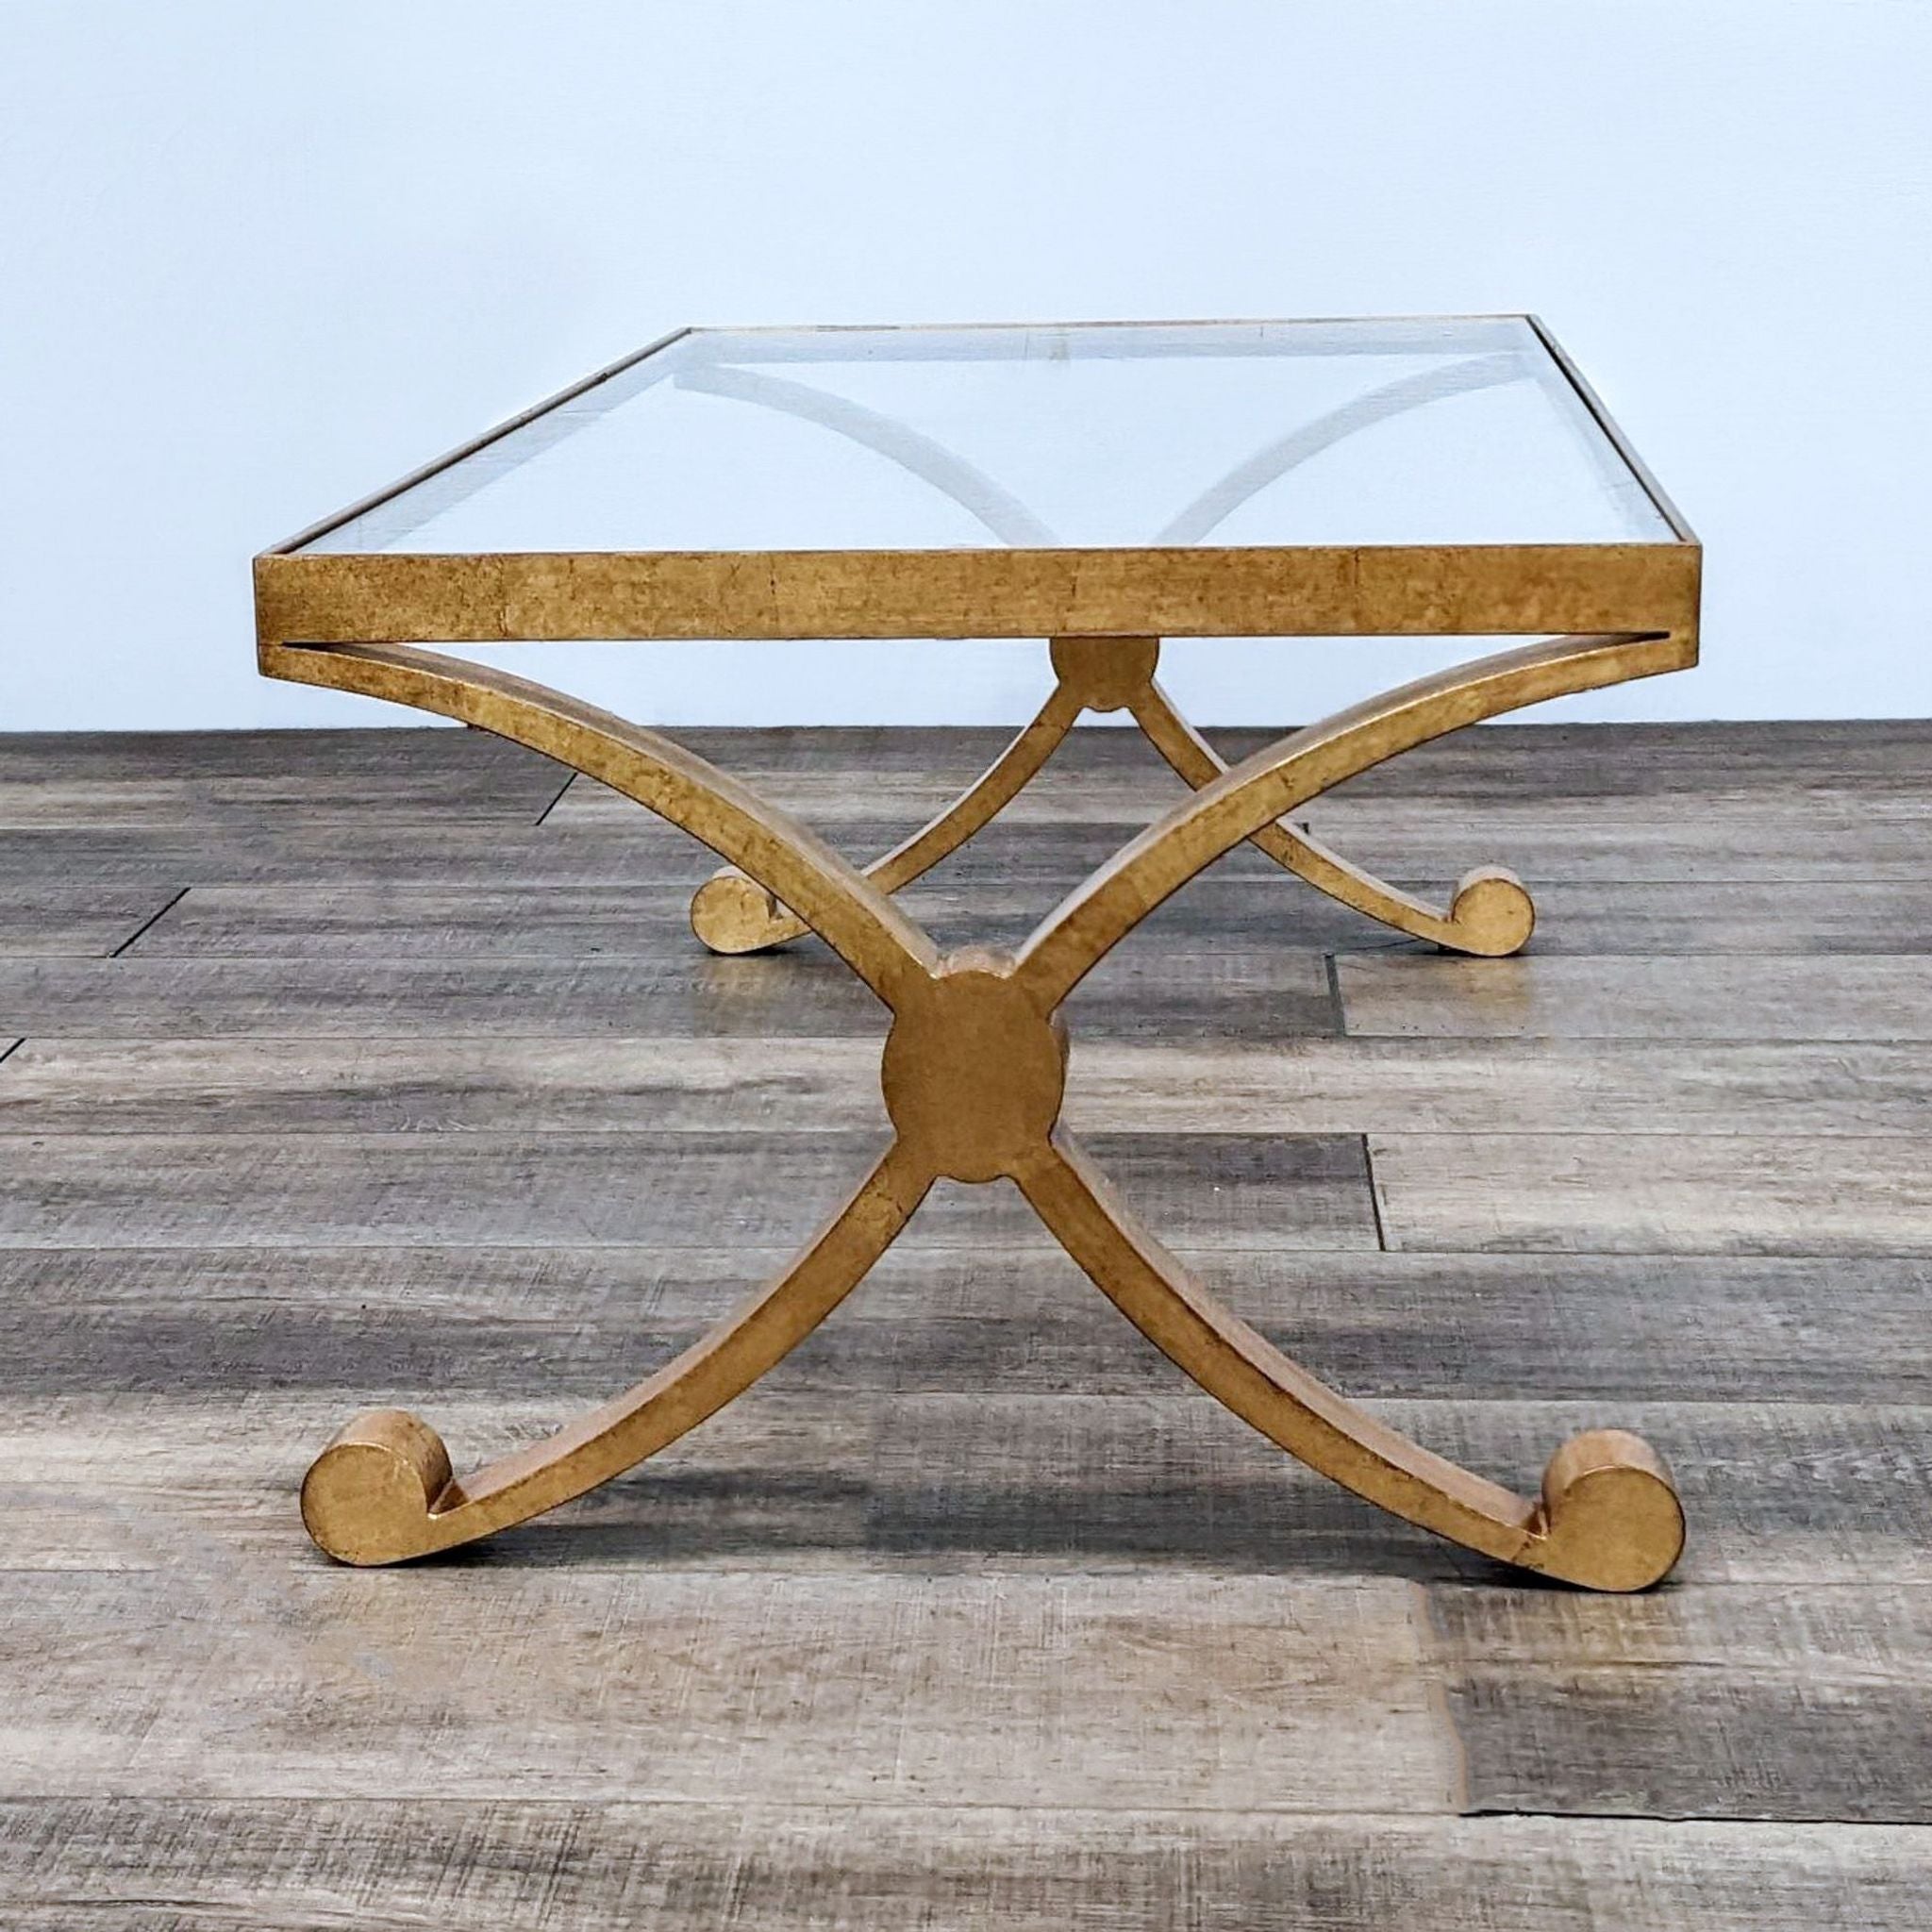 Alt text: David Iatesta coffee table with a glass top and a gilt-finished metal base, featuring a cross and scroll design on a wooden floor.